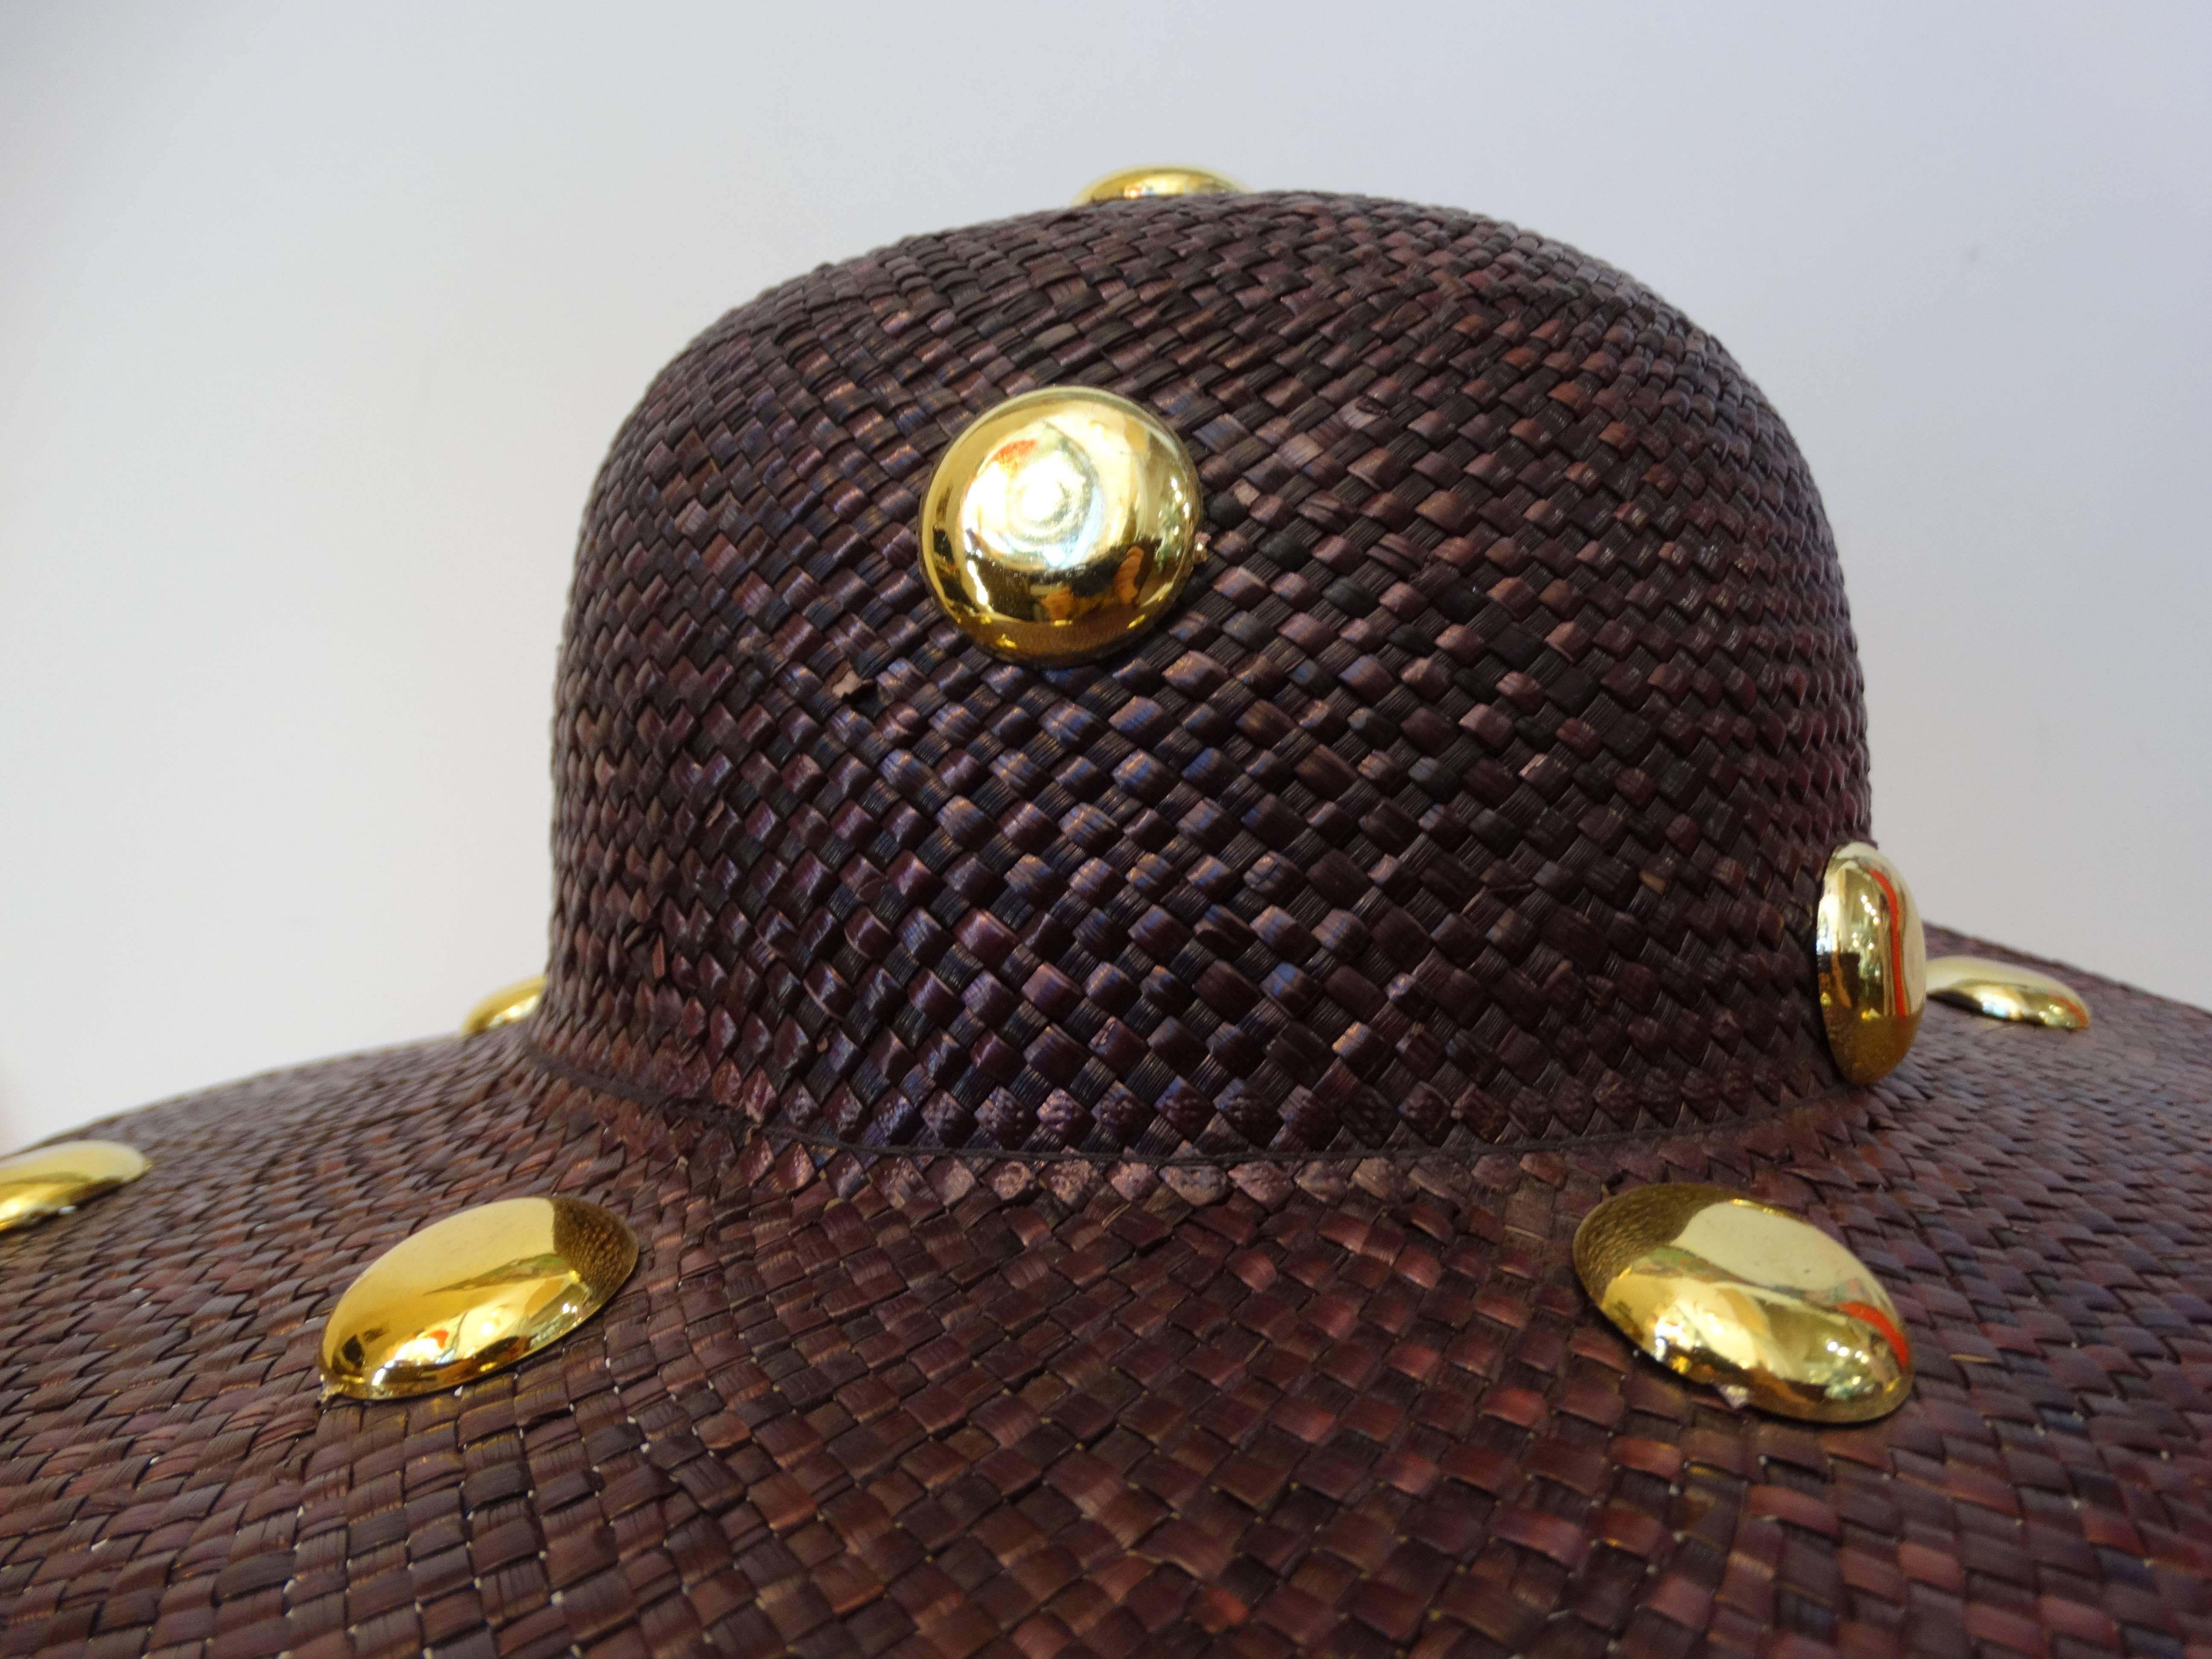 Fabulous 1980's Saks Fifth Avenue wide brim straw hat with large gold studs. Dyed deep purple. The base of the crown is plain with large plastic gold studs. The opening of the hat measures 21 1/2” around - this should fit a medium sized head. The